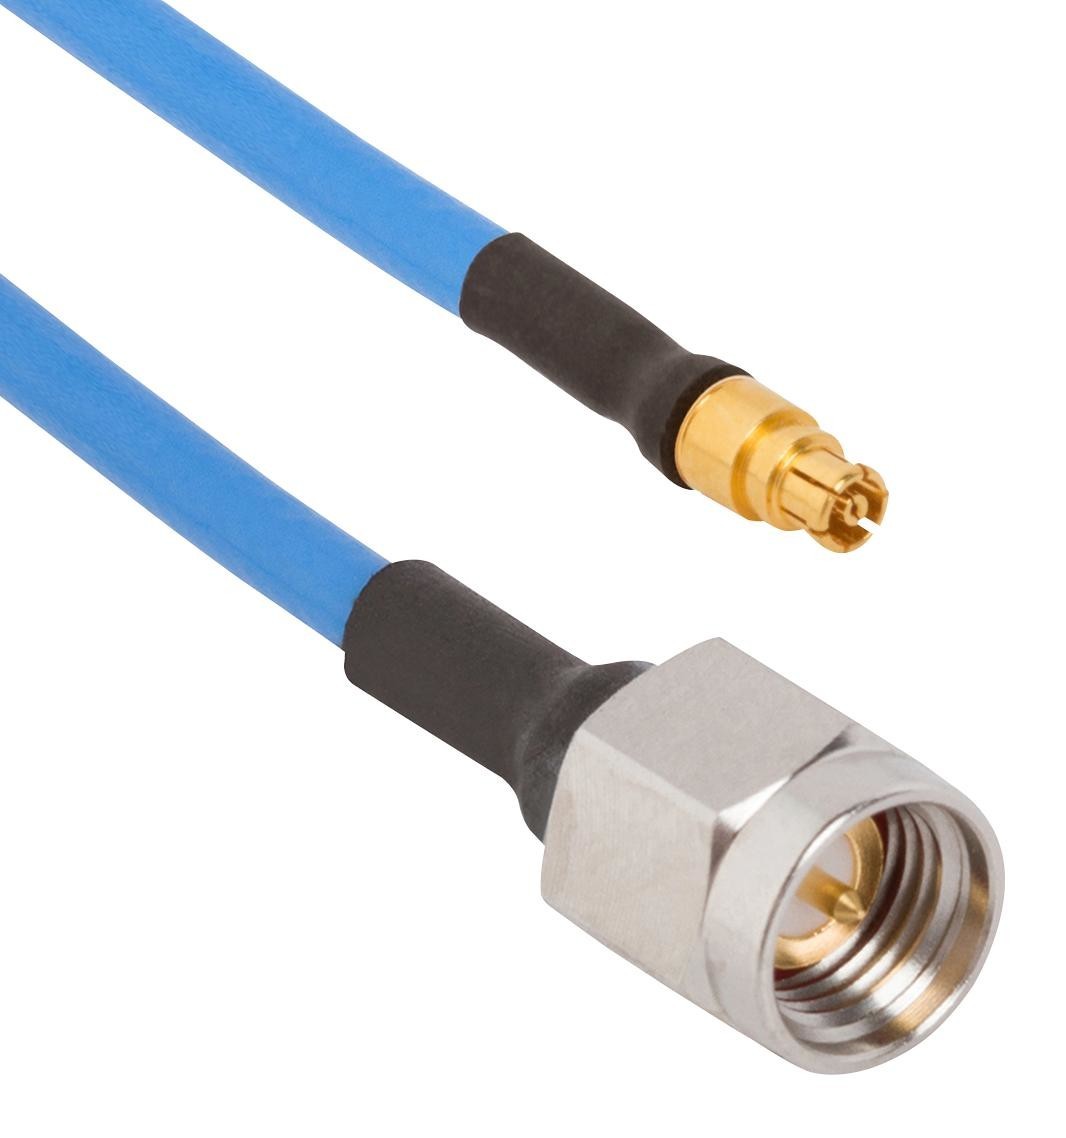 Amphenol SV Microwave 7032-7527. Smpm Female To Sma Male Cable Assembly For 0.085 Cable (Oal 12